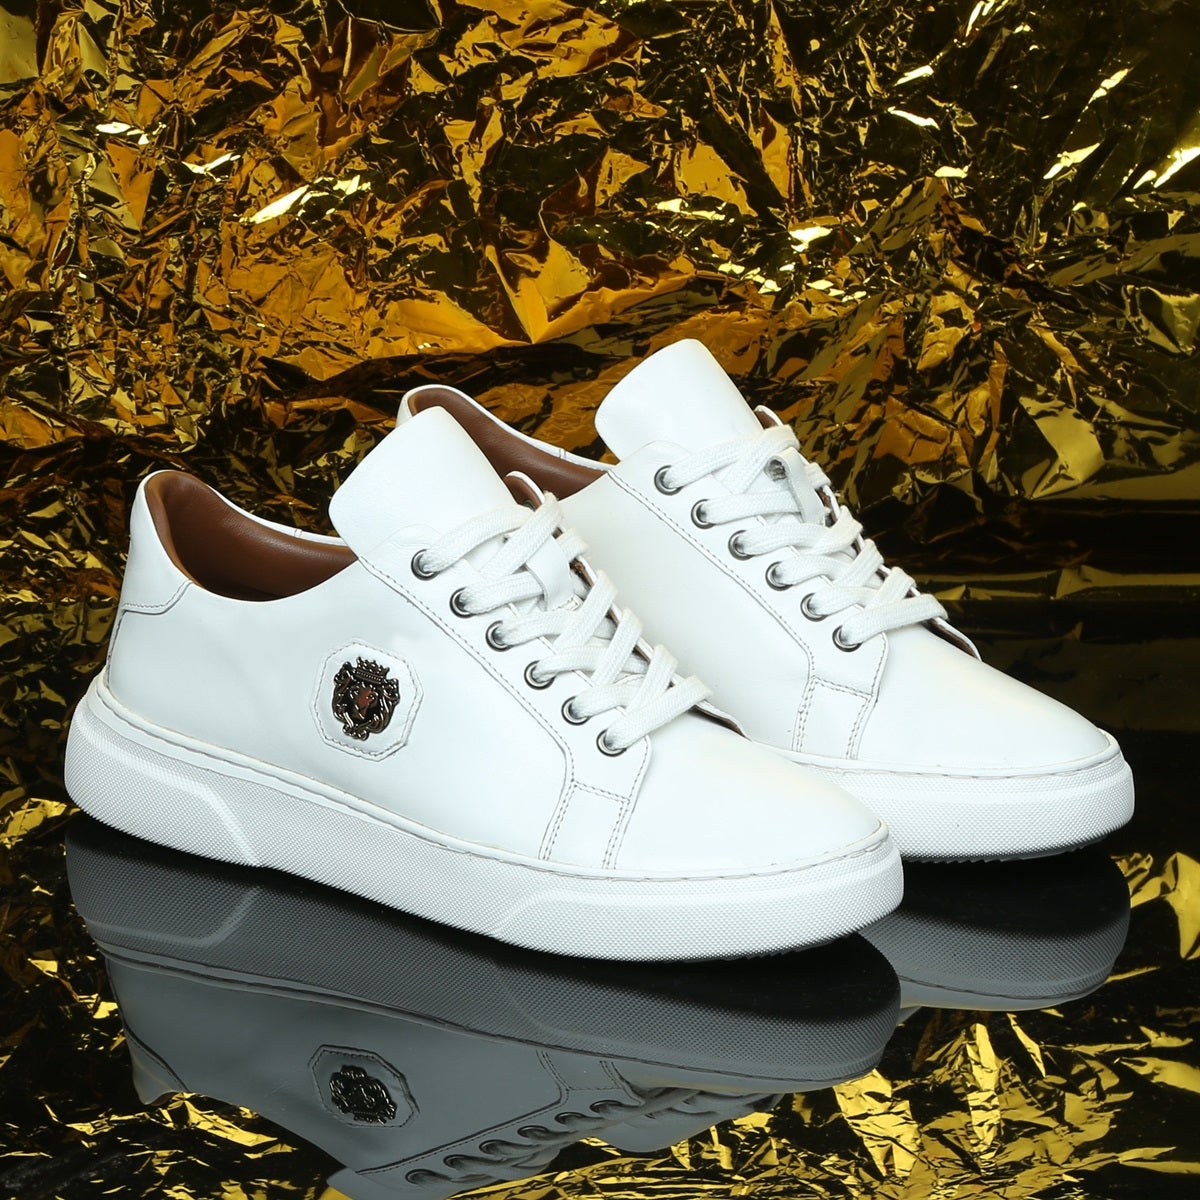 Buy White Leather Sneakers (Numeric_8) at Amazon.in